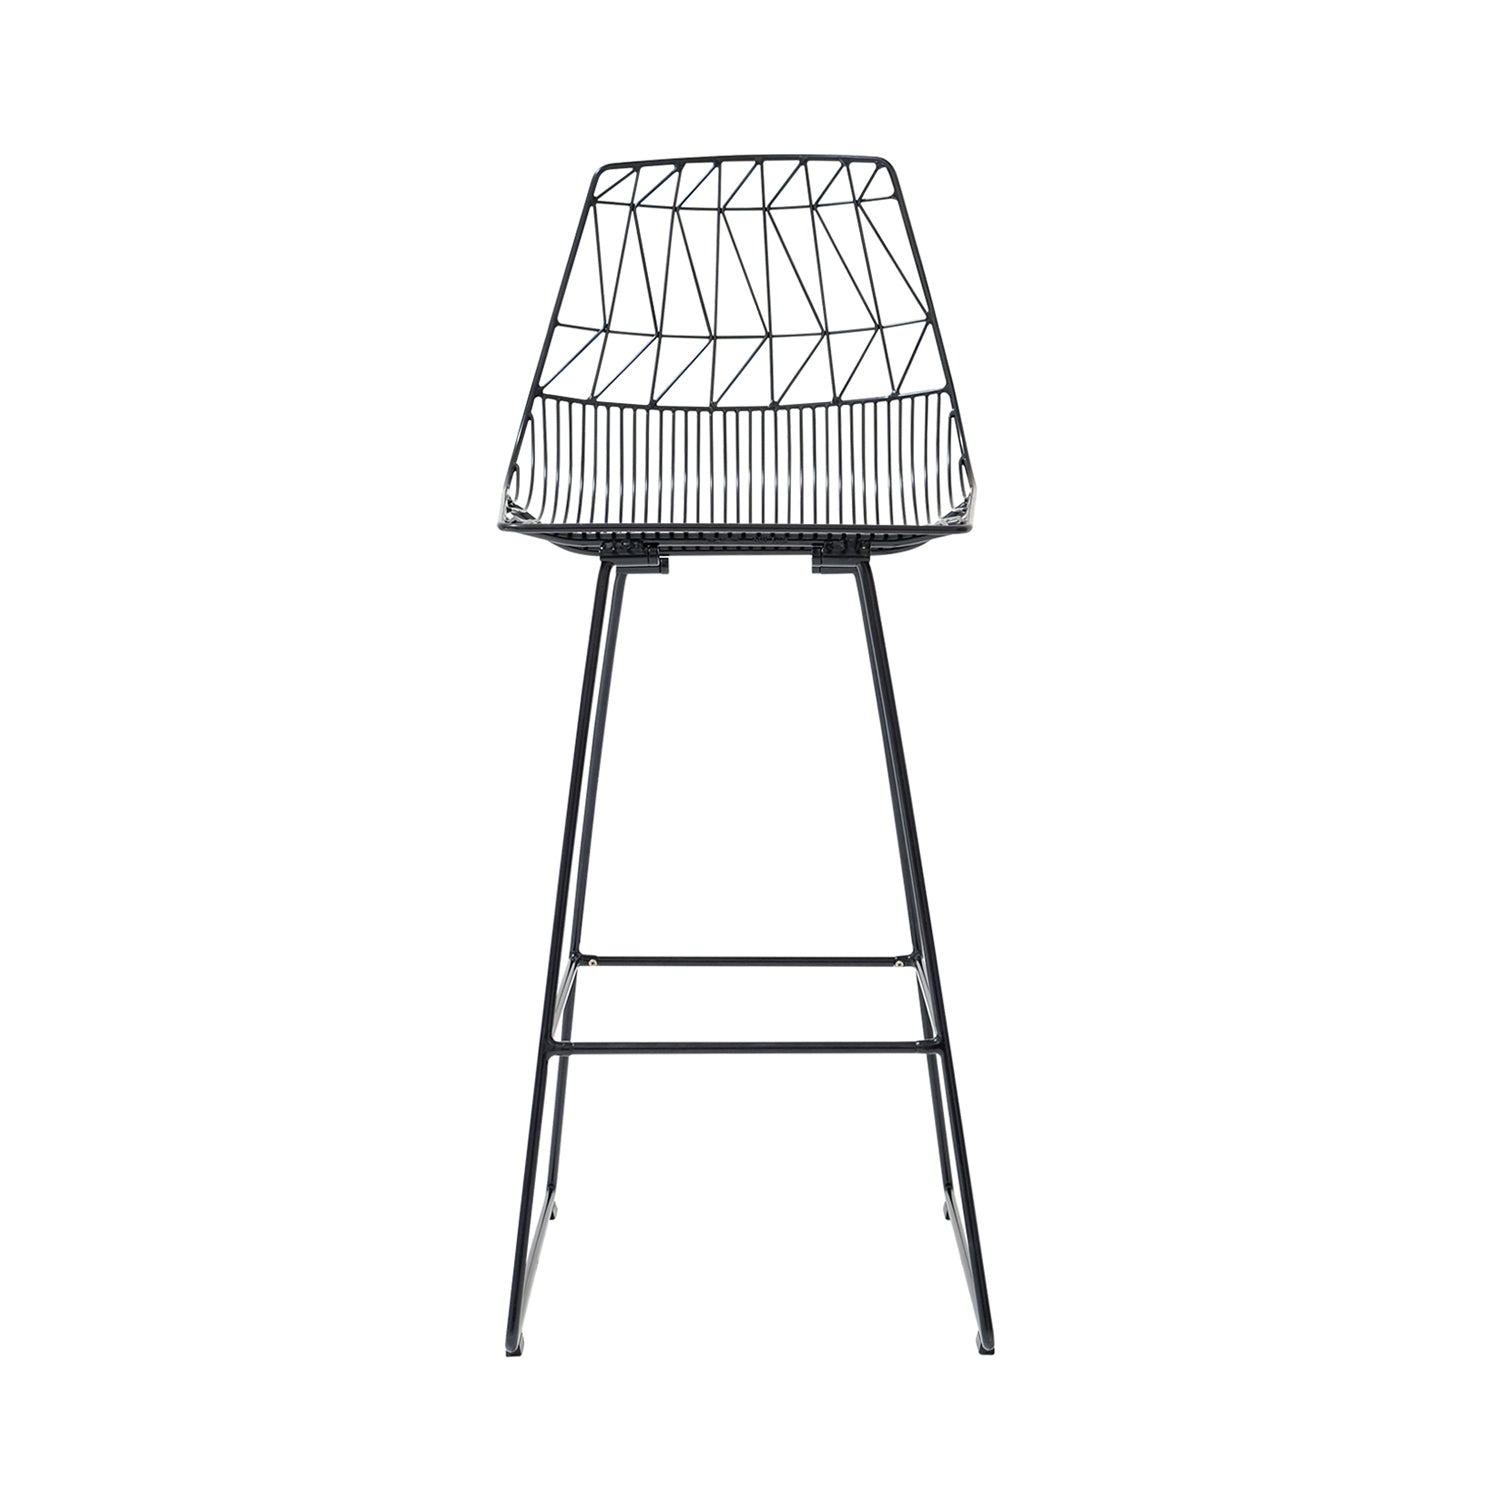 Lucy Bar + Counter Stool: Color + Bar + Black + Without Seat Pad